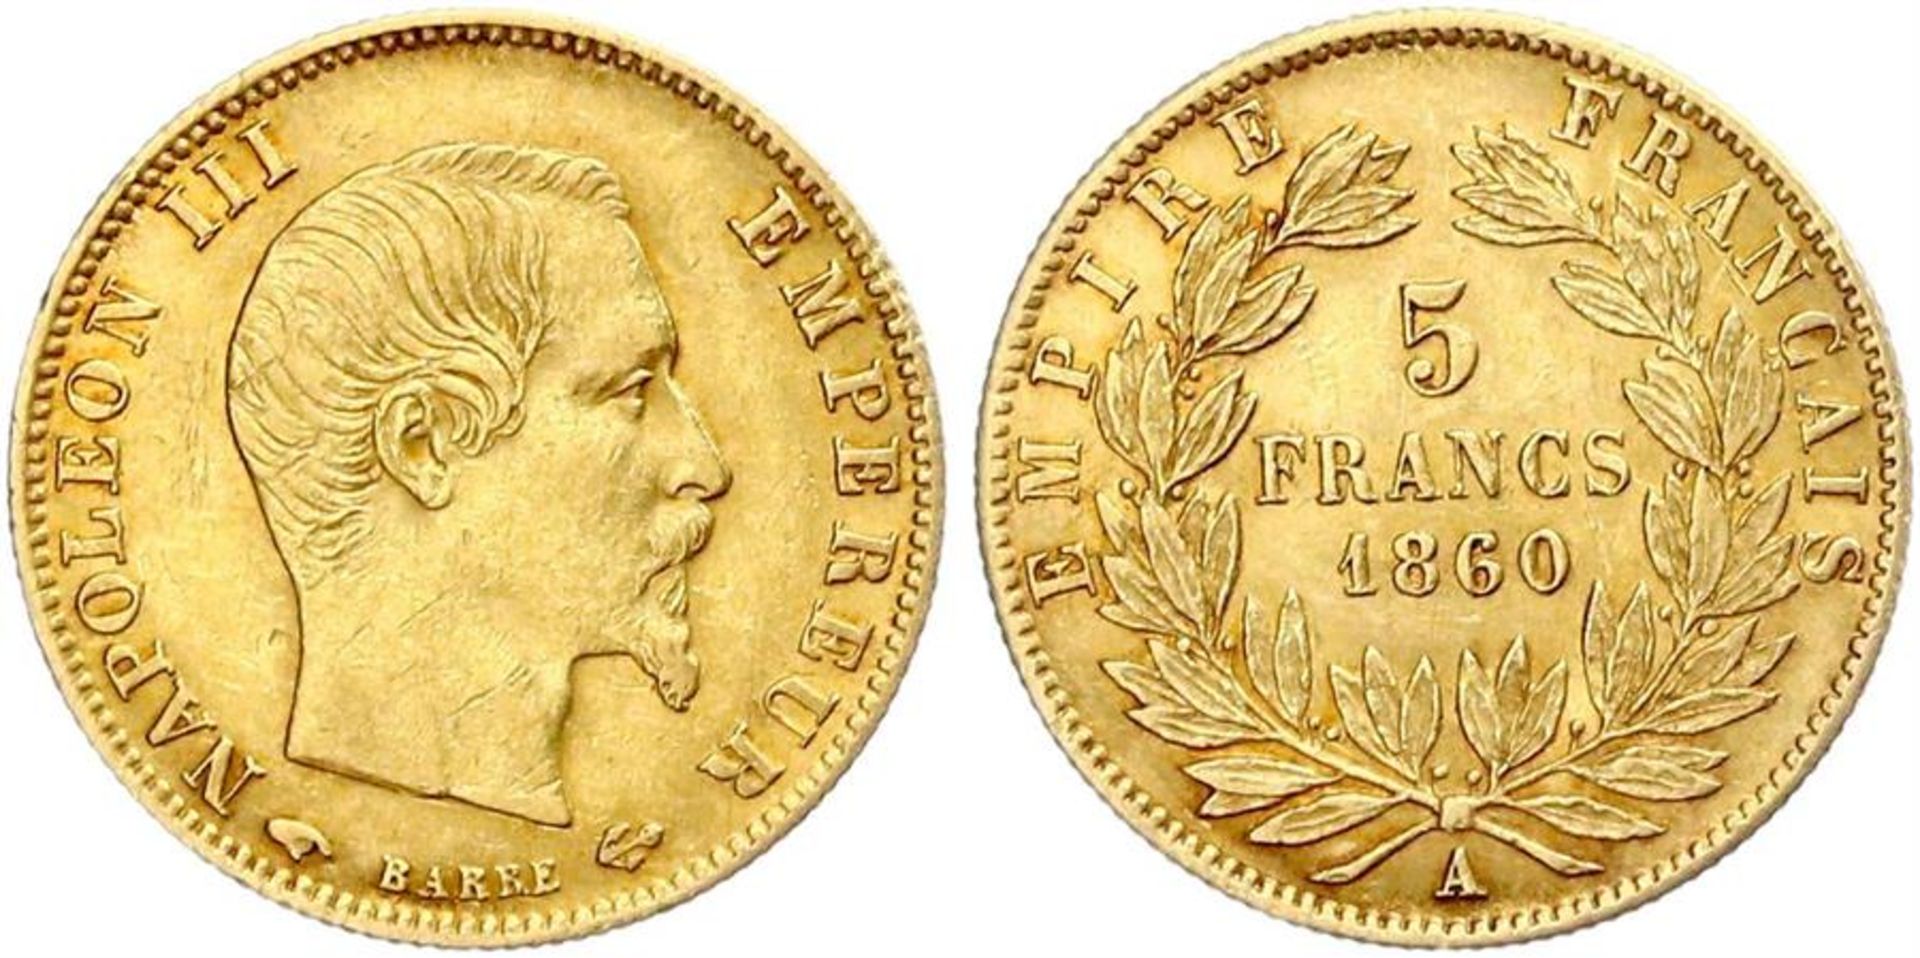 1860 - 5 Francs A - Paris - Solid Gold - Extremely fine